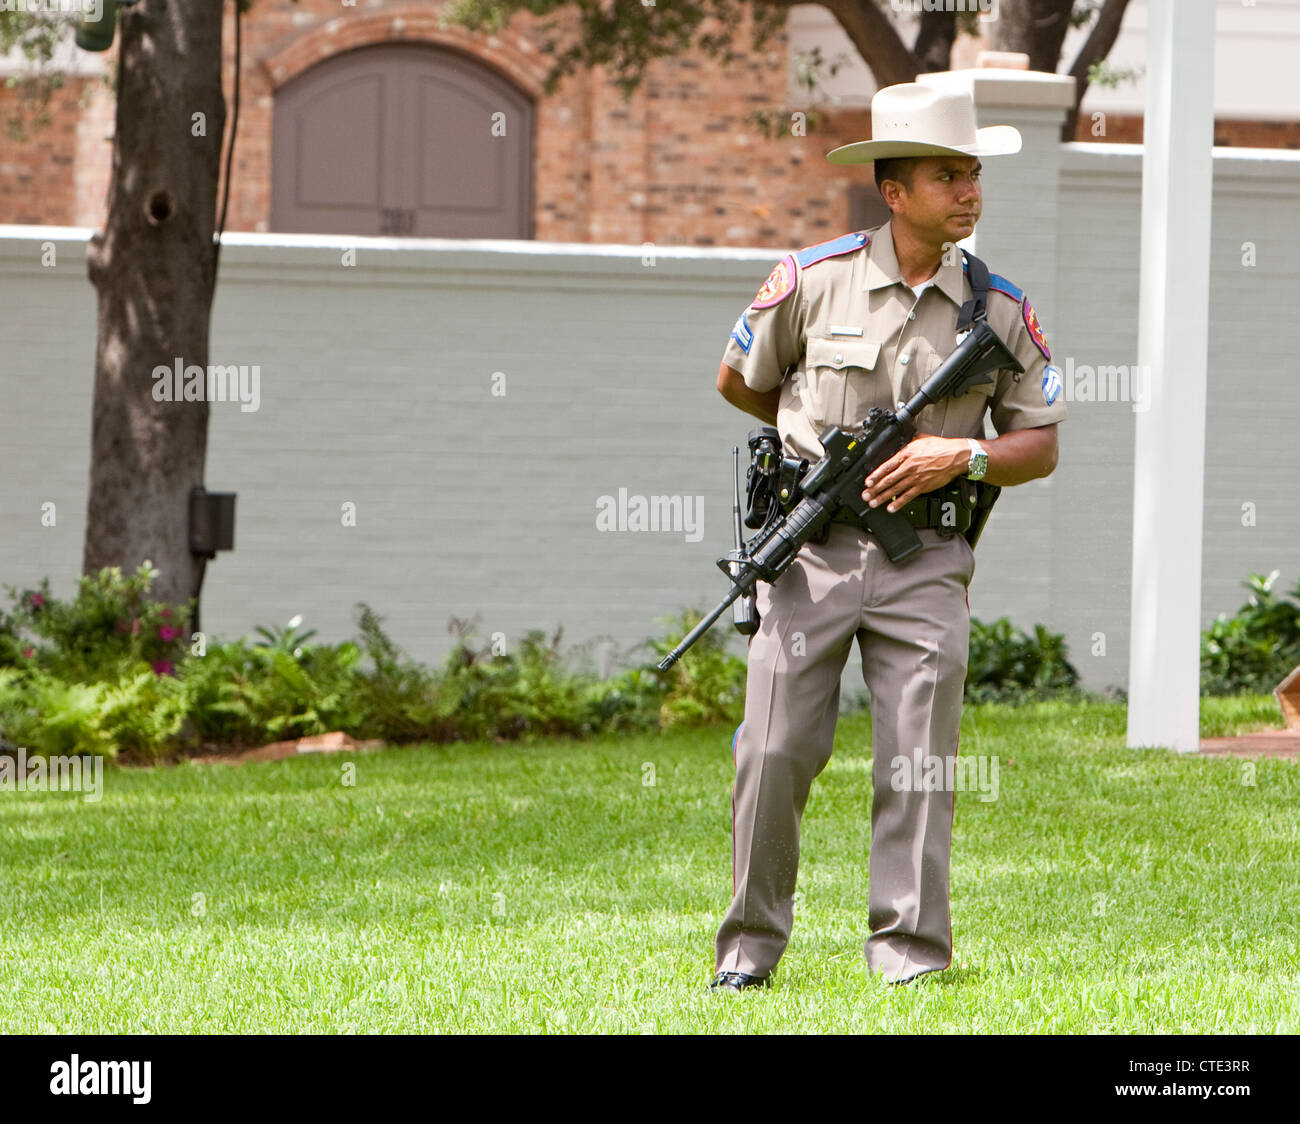 Officers with the Texas Department of Public Safety carry large weapons while on the Texas Governor's Mansion grounds. Stock Photo